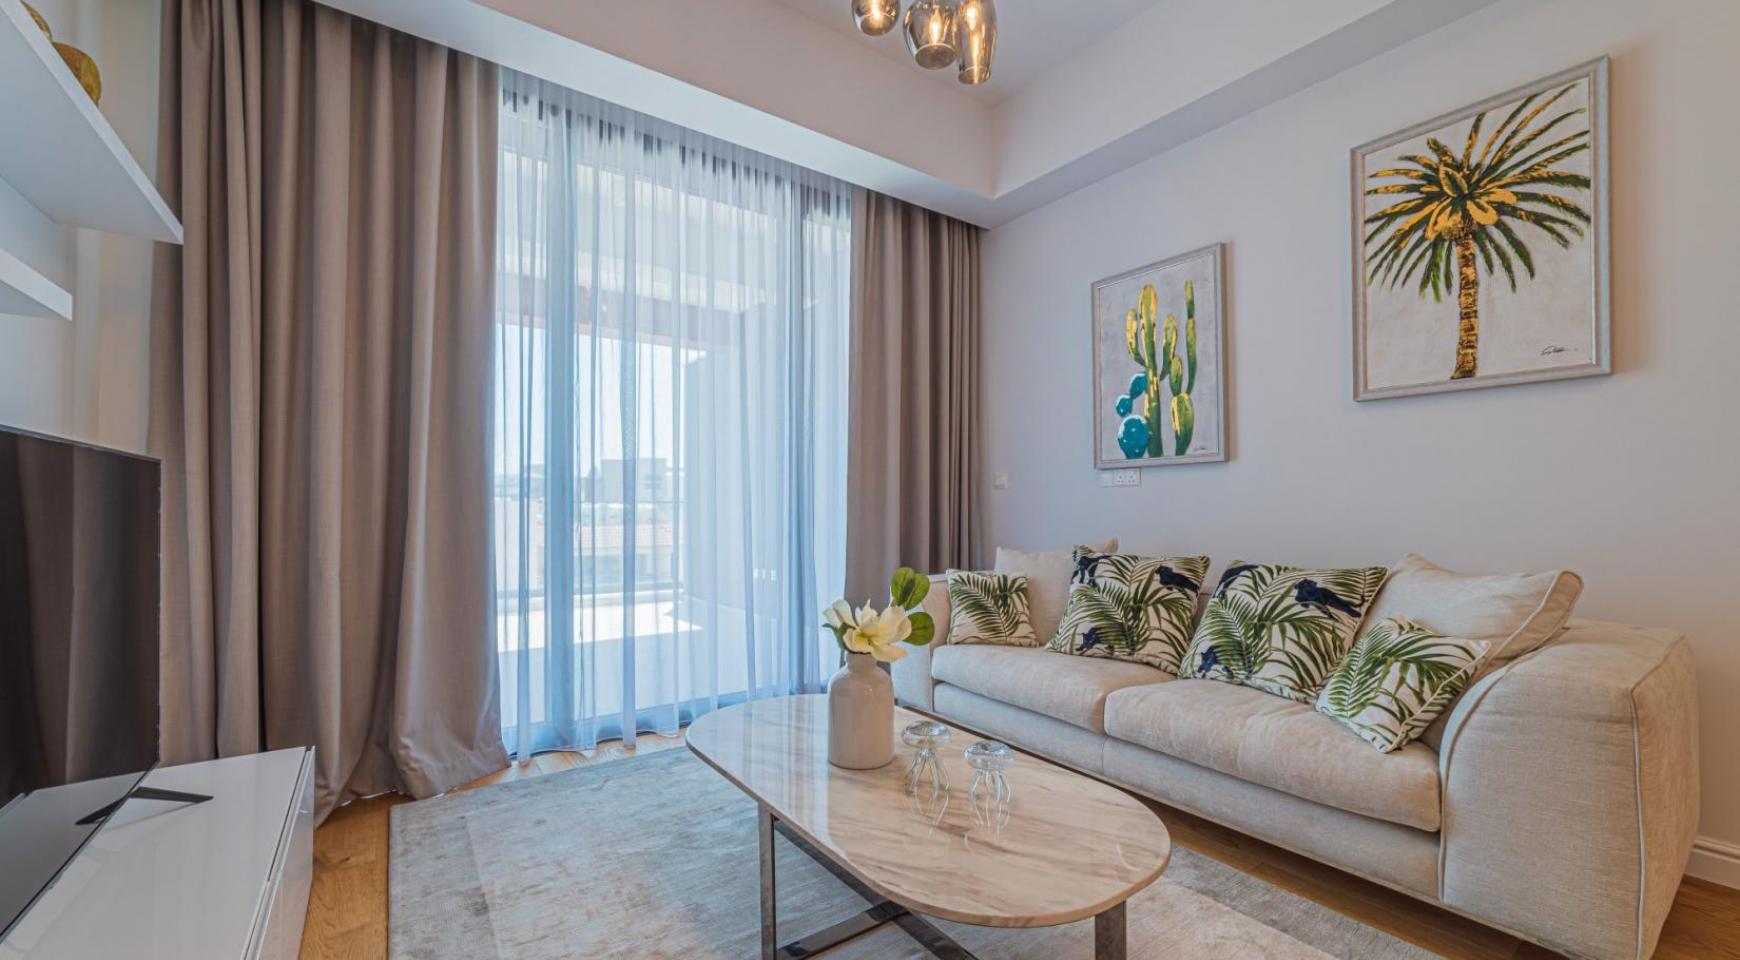 Hortensia Residence, Apt. 102. 2 Bedroom Apartment within a New Complex near the Sea  - 51